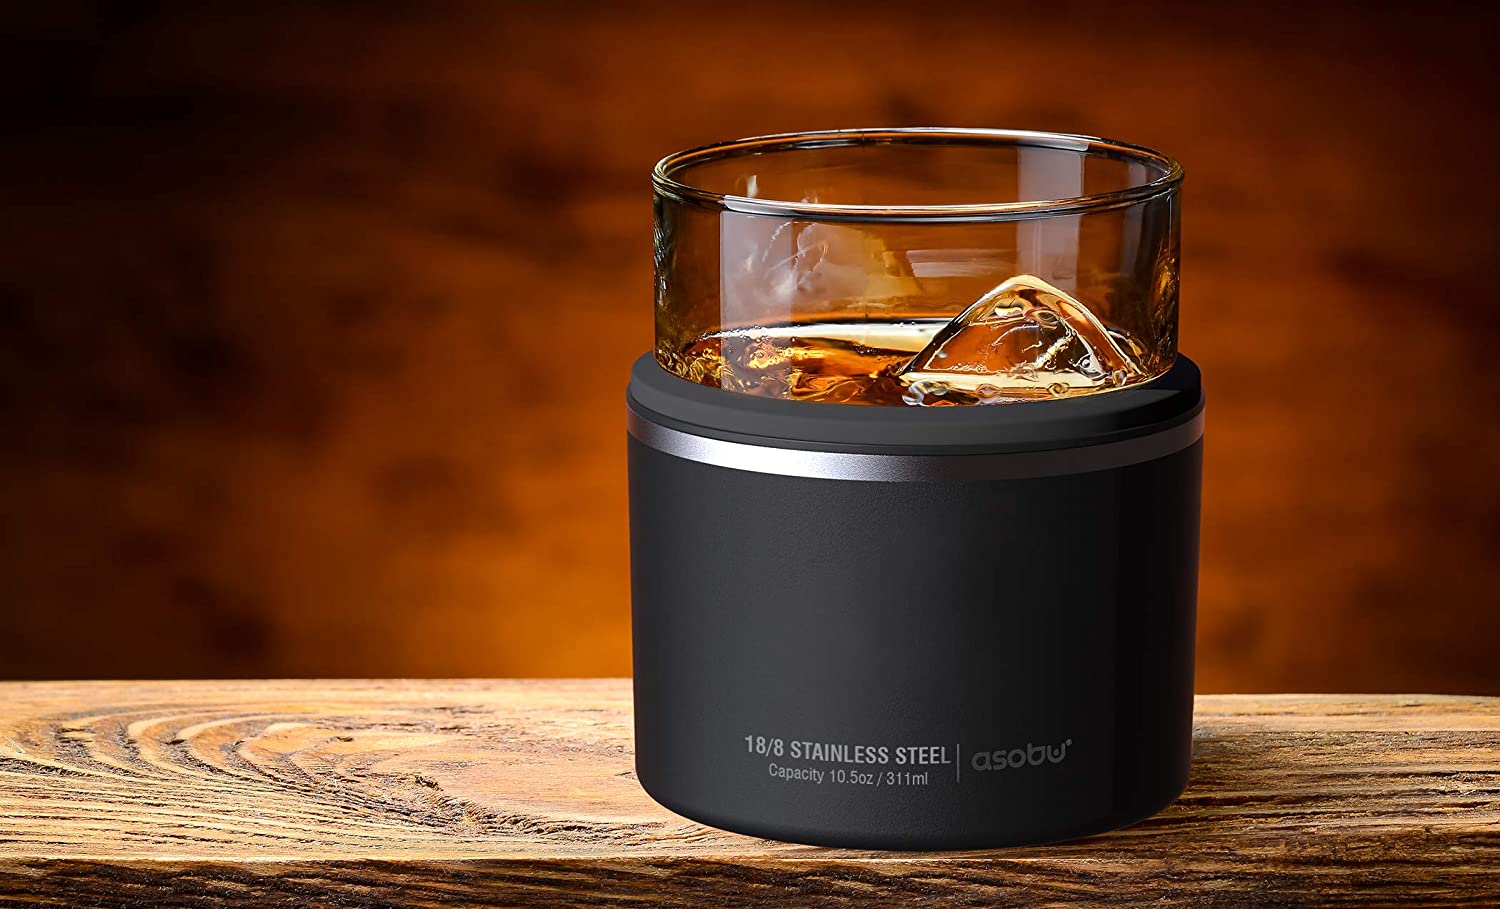 https://www.wideopencountry.com/wp-content/uploads/sites/4/2021/07/Asobu-Insulated-Whiskey-Glass-and-Stainless-Steel-Sleeve-Wood-.jpg?resize=1500%2C909